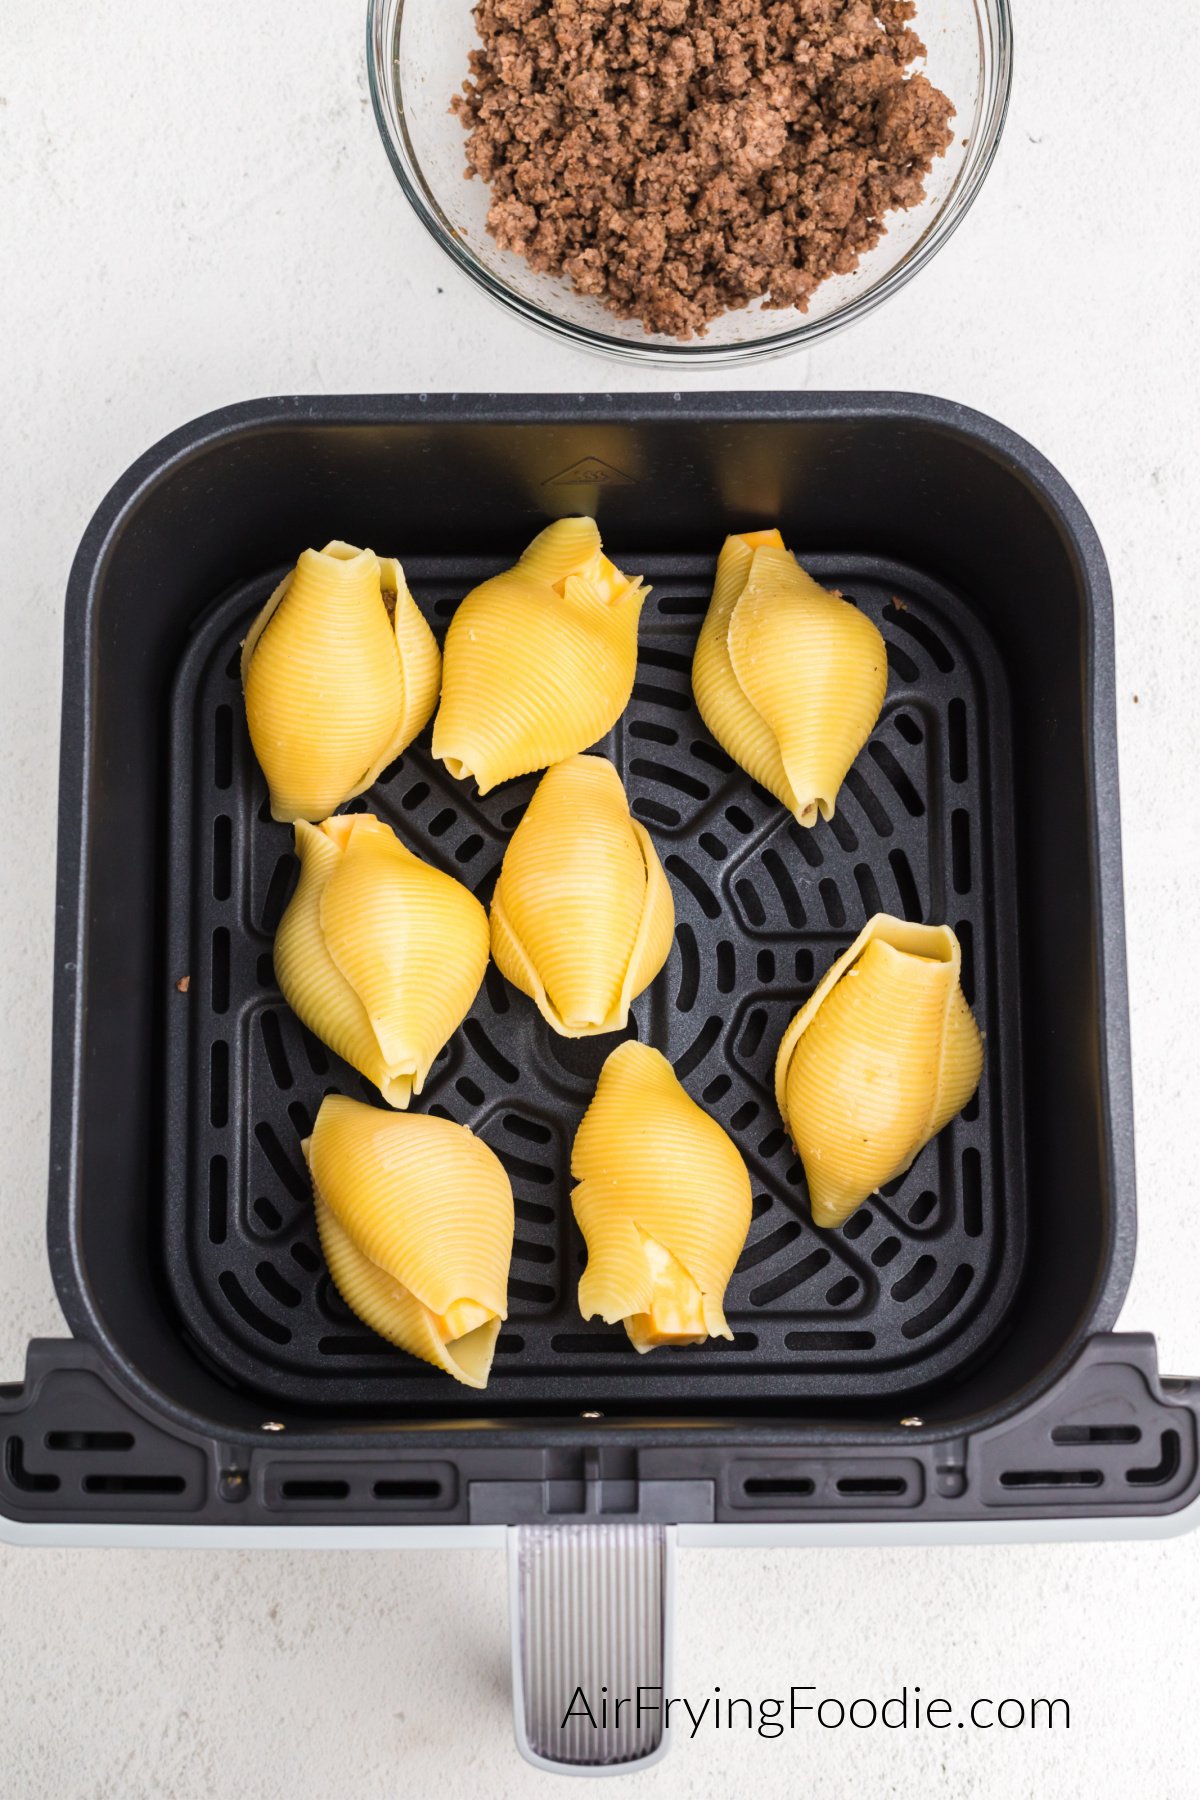 Stuffed shells in the basket of the air fryer, ready to cook.